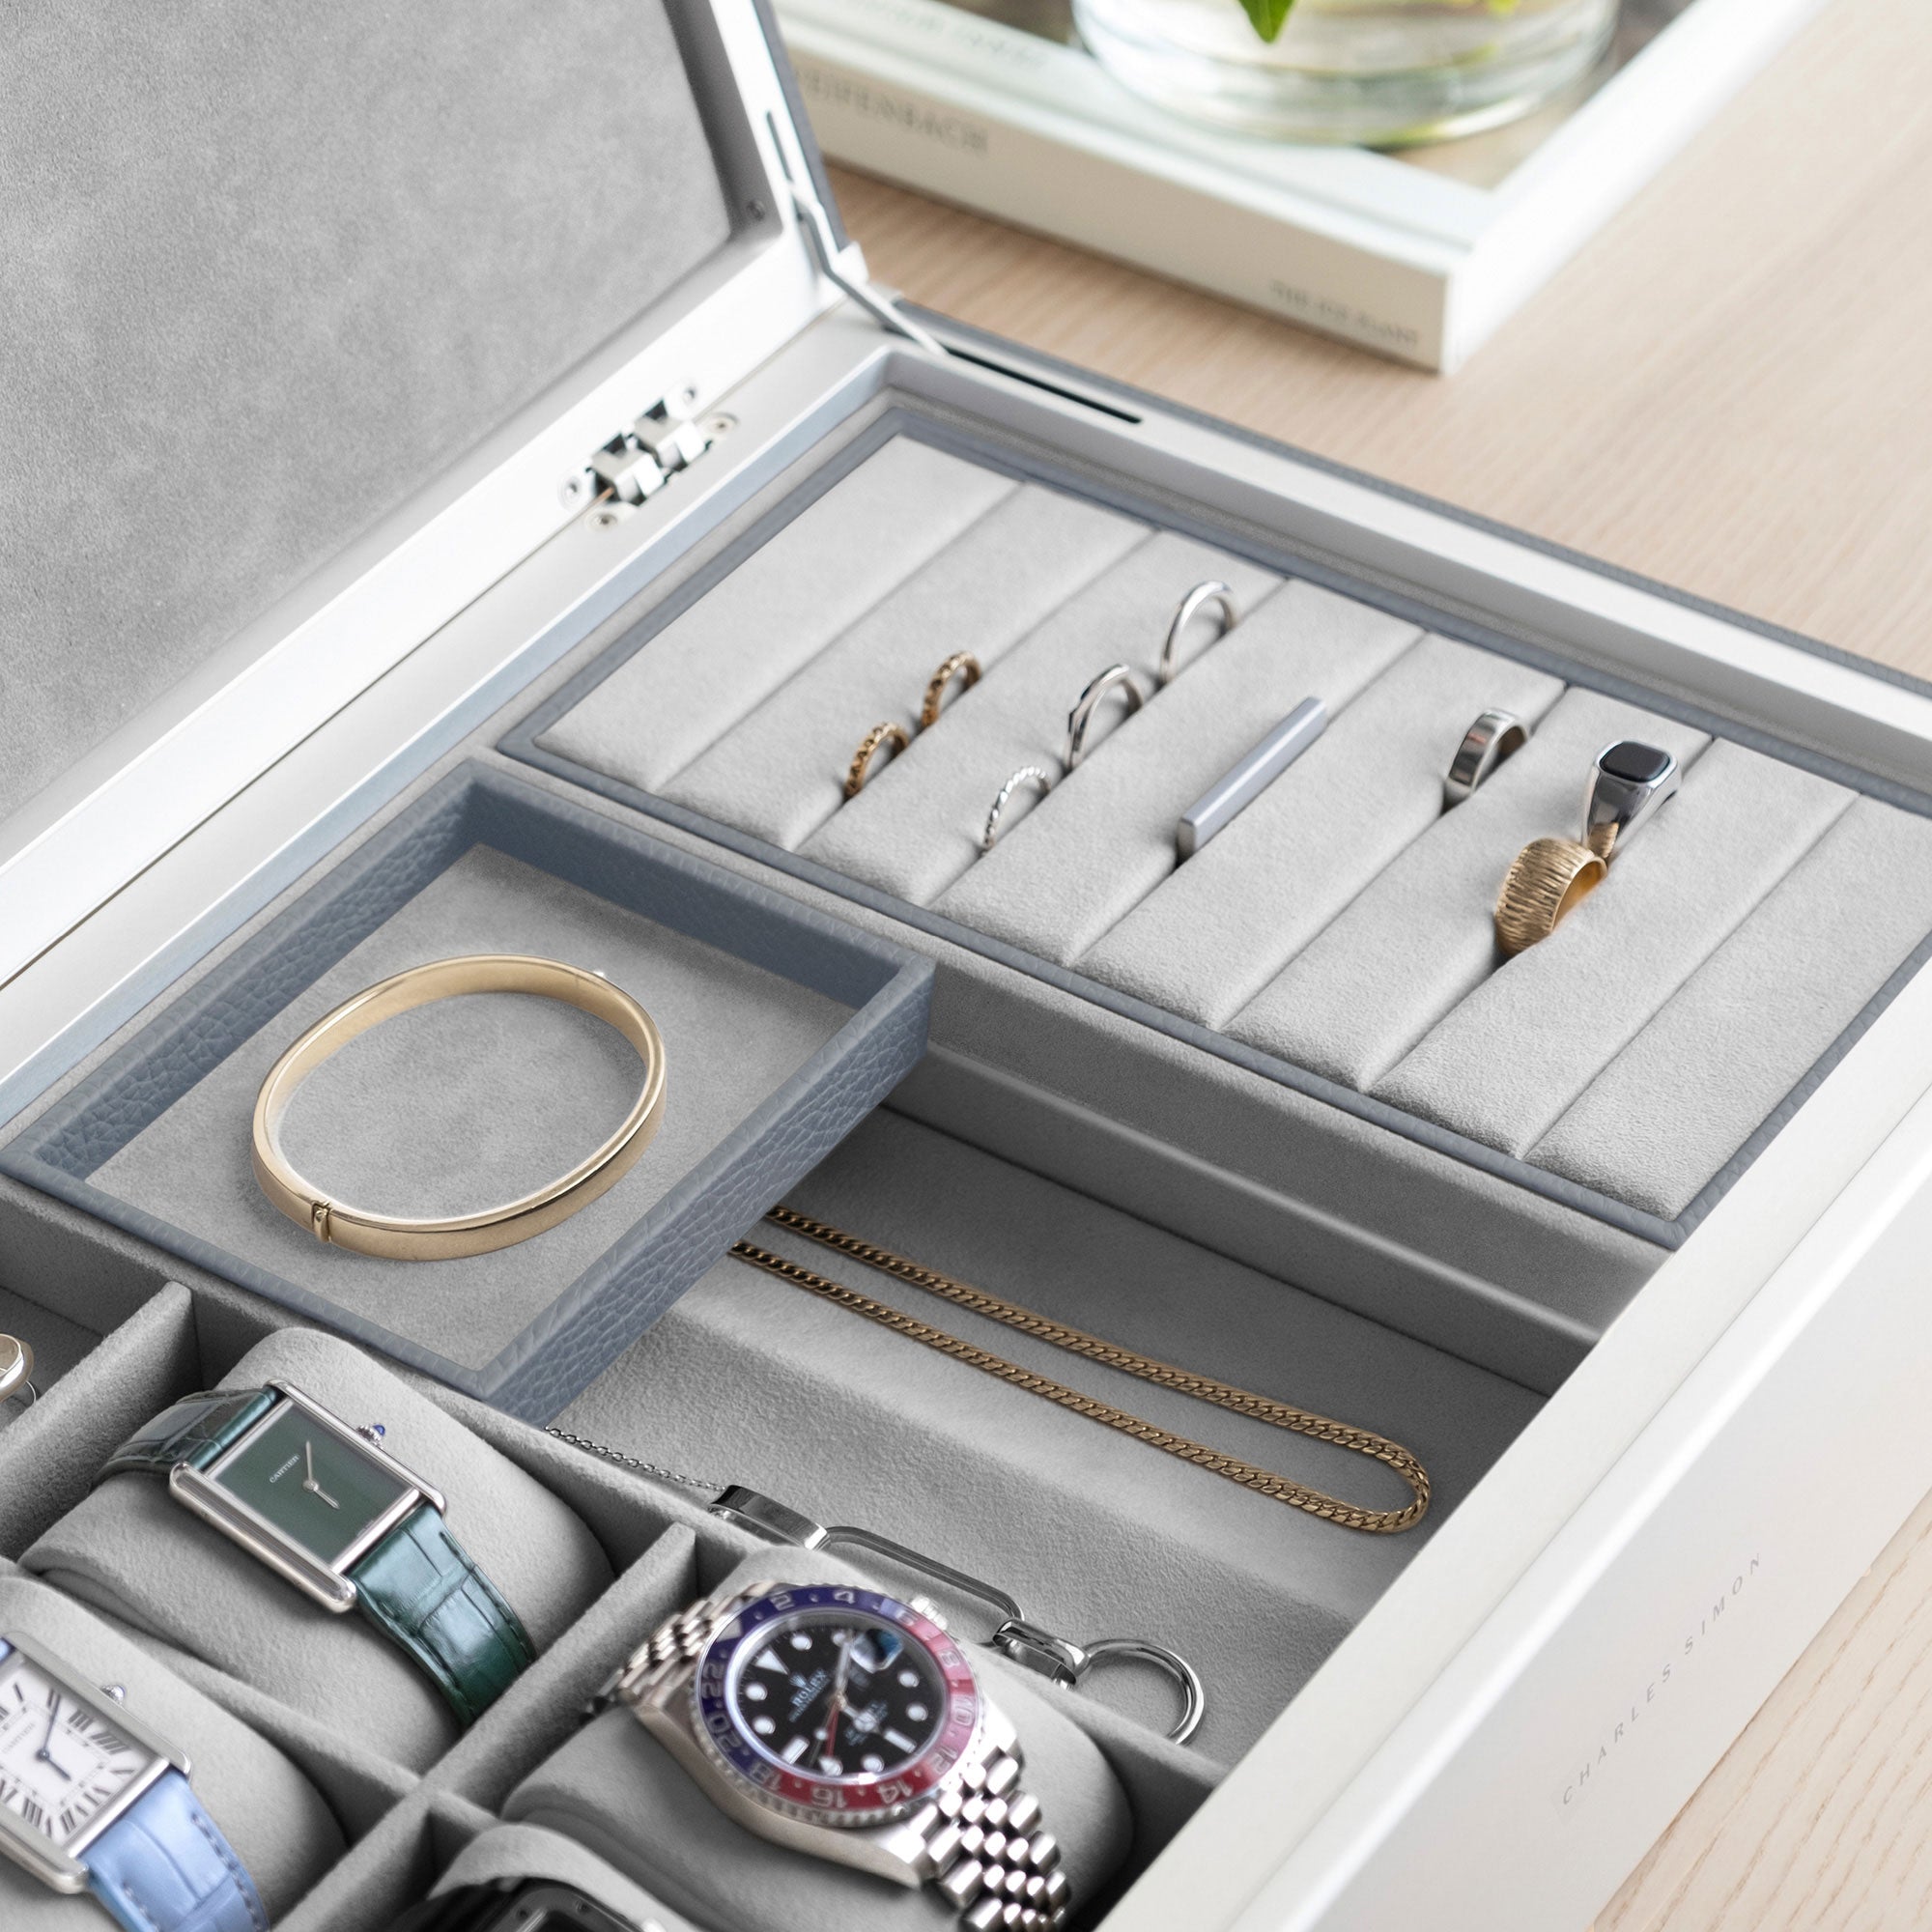 Detail shot of Taylor 4 Watch and Jewelry box in cloud grey leather and fog grey interior showing the movable jewelry organization compartments of the handmade watch and jewelry storage box.